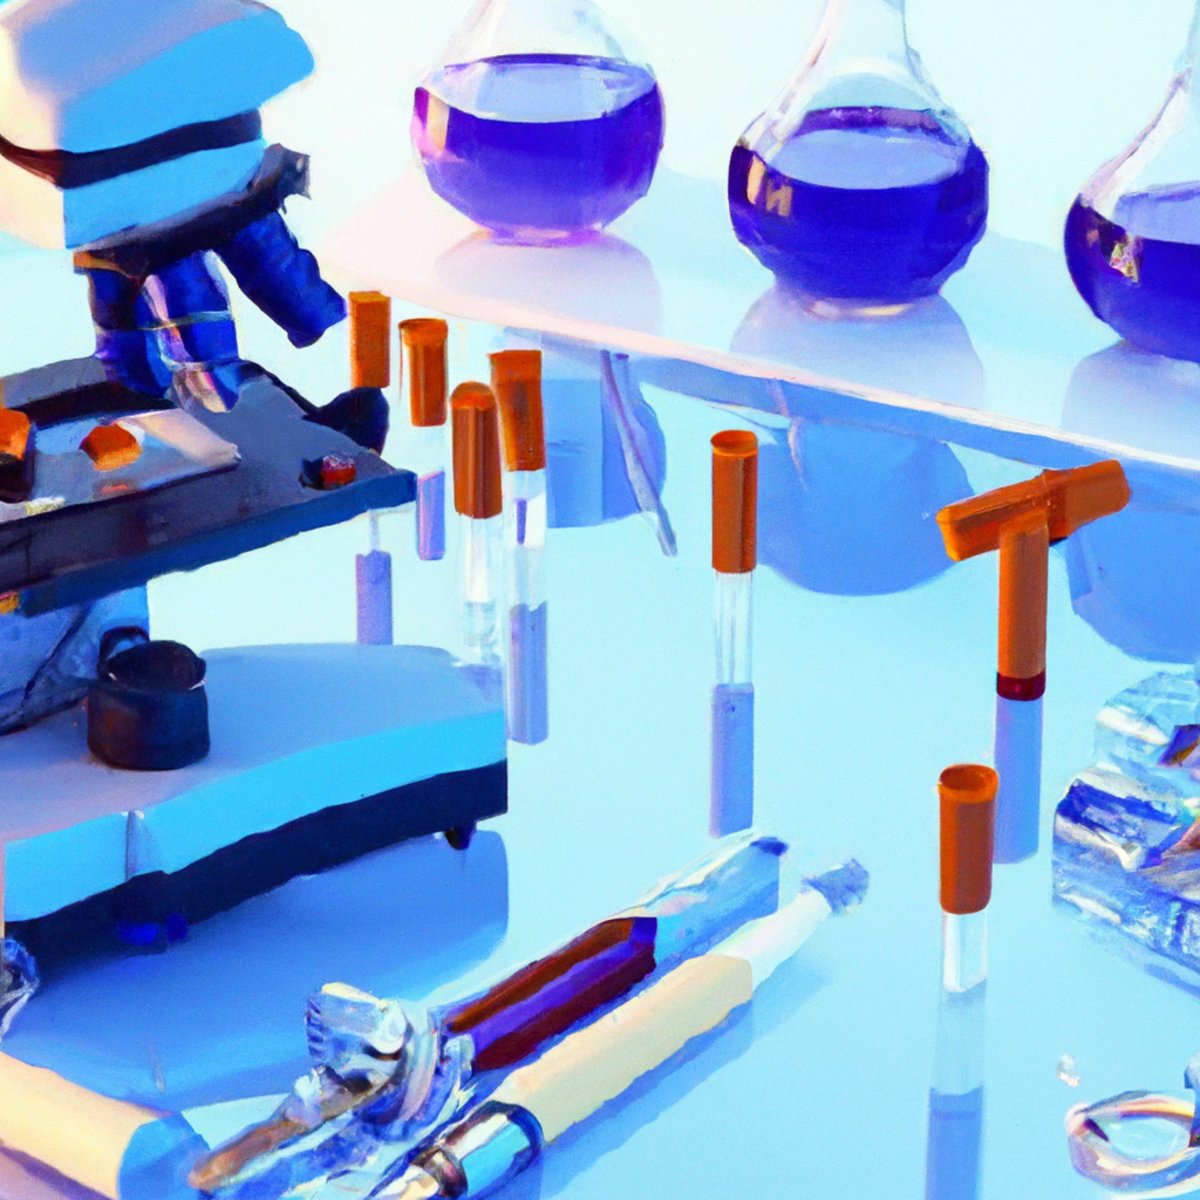 Close-up of a medical laboratory with scientific equipment and tools, symbolizing meticulous research on Fibrocalculous Pancreatic Diabetes (FCPD).